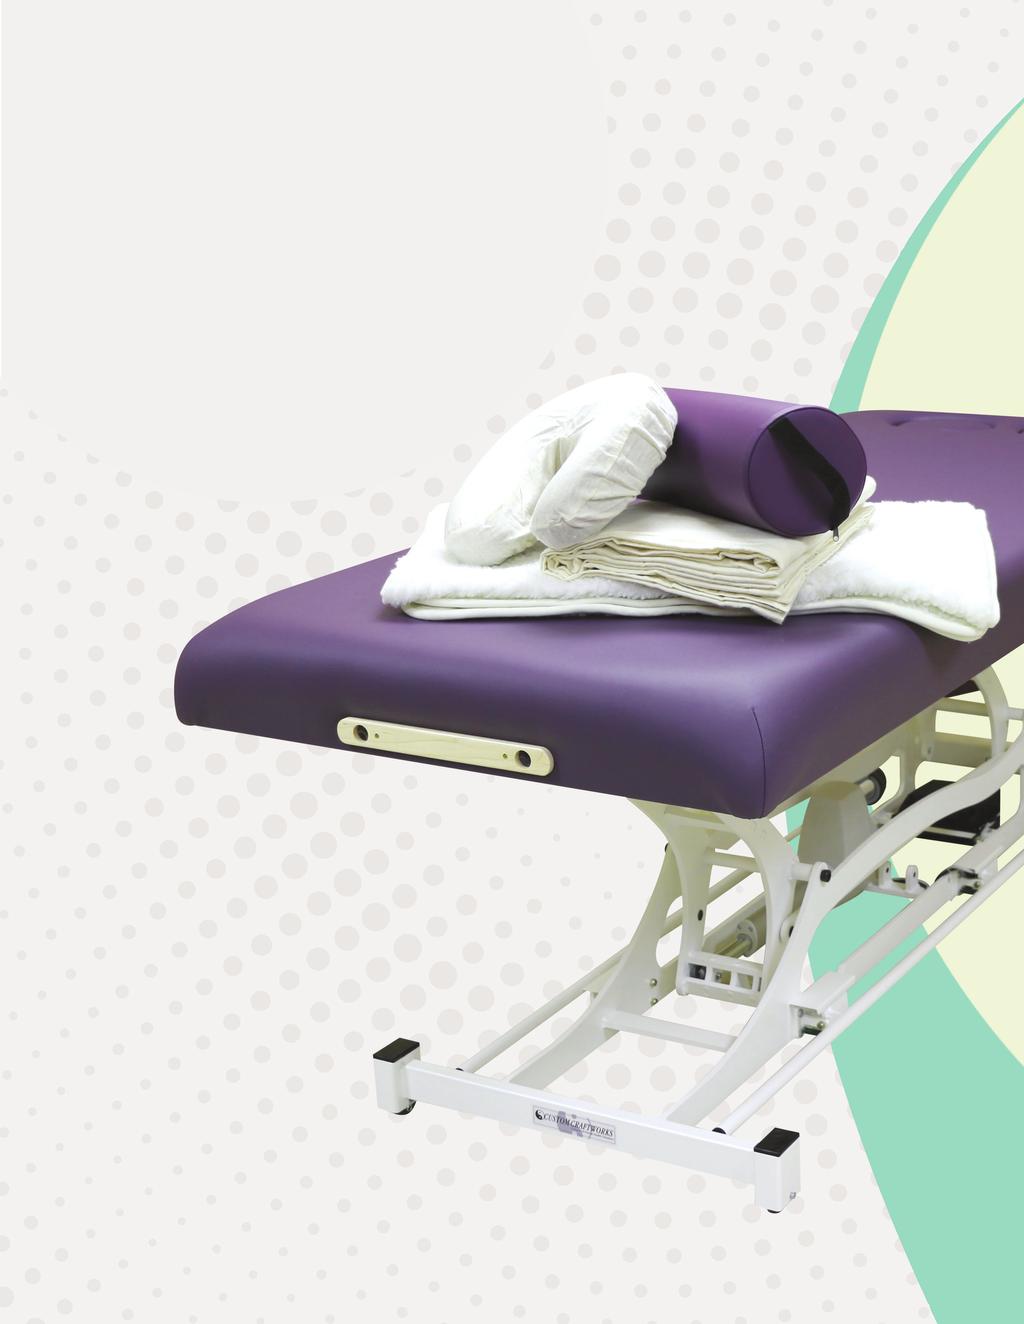 BEST SELLING Massage Table Kits STARTING AT